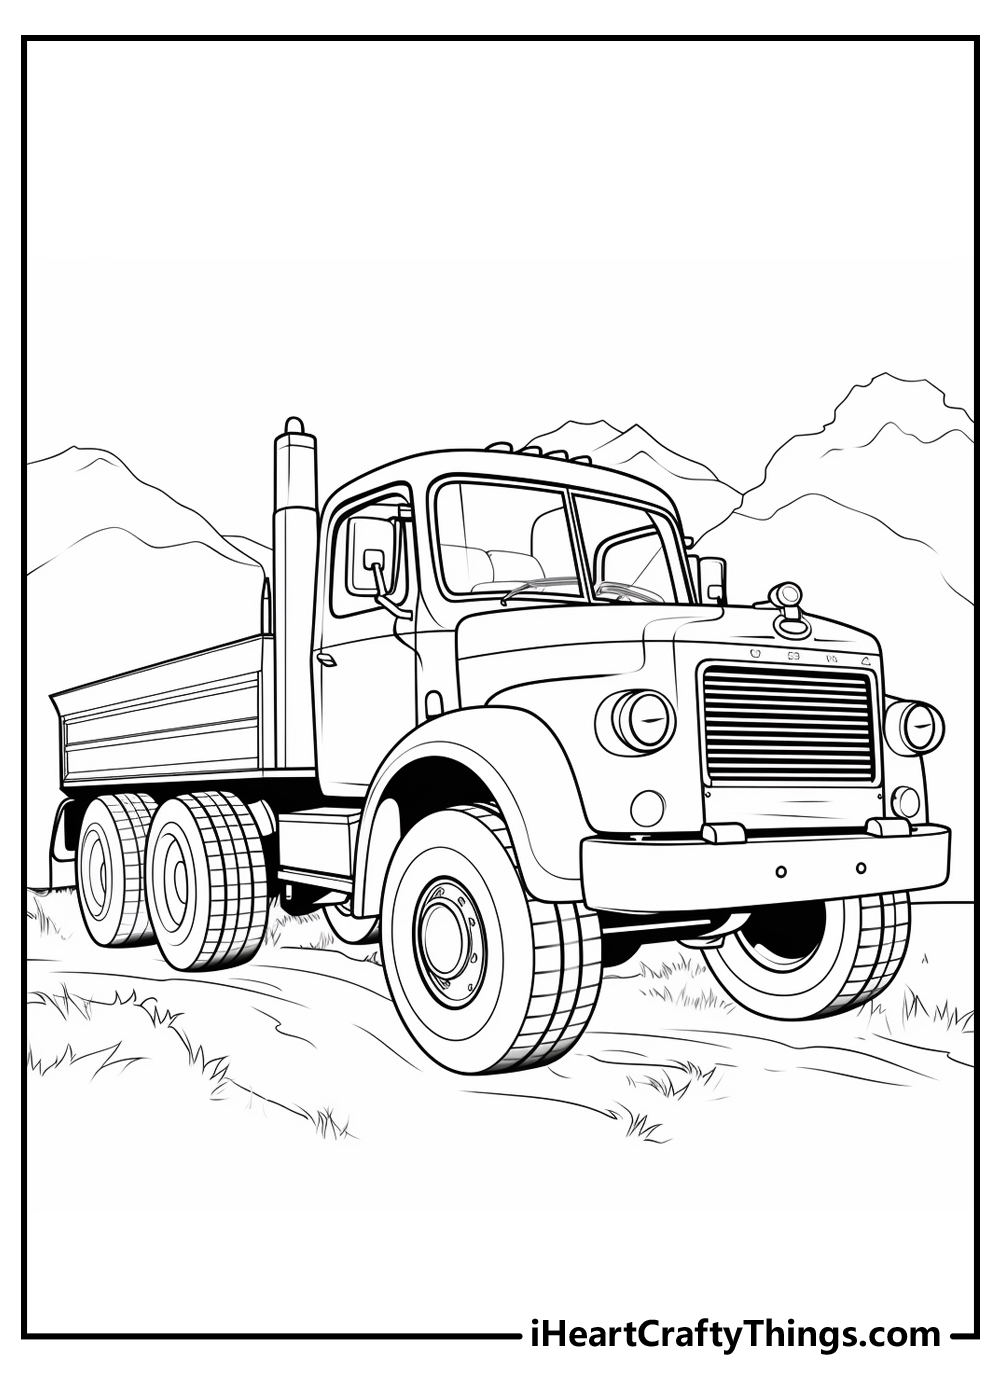 Original Truck Coloring Pages for Kids